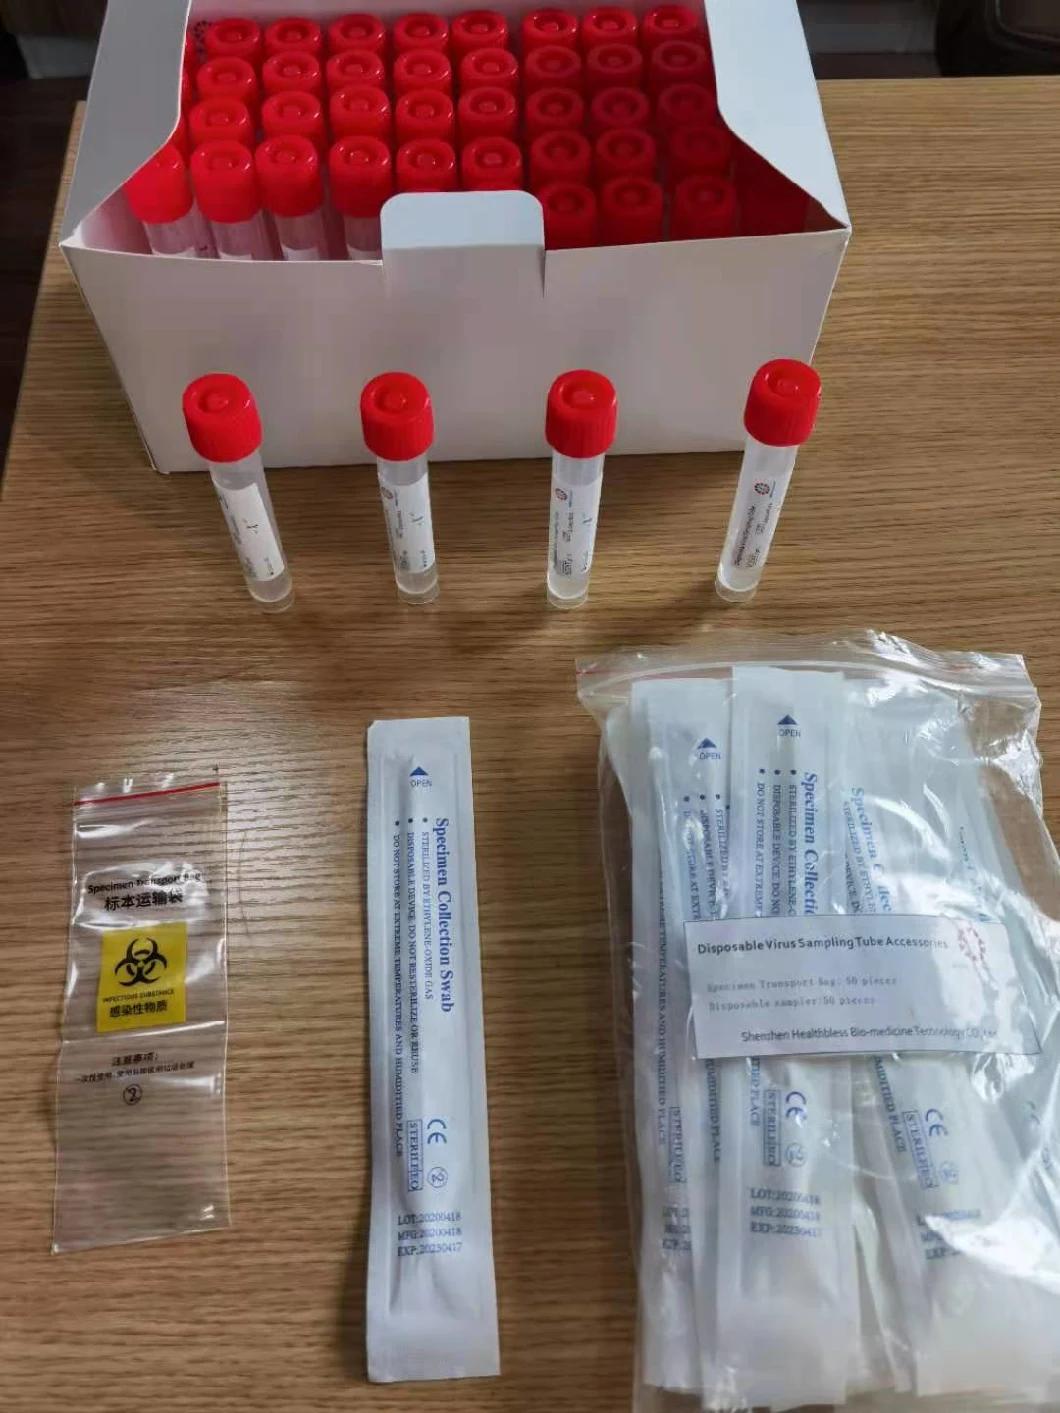 Sampling Collection Tube for Influenza, Bird Flu, Hpv, Hand-Foot-Mouth Disease, Measles